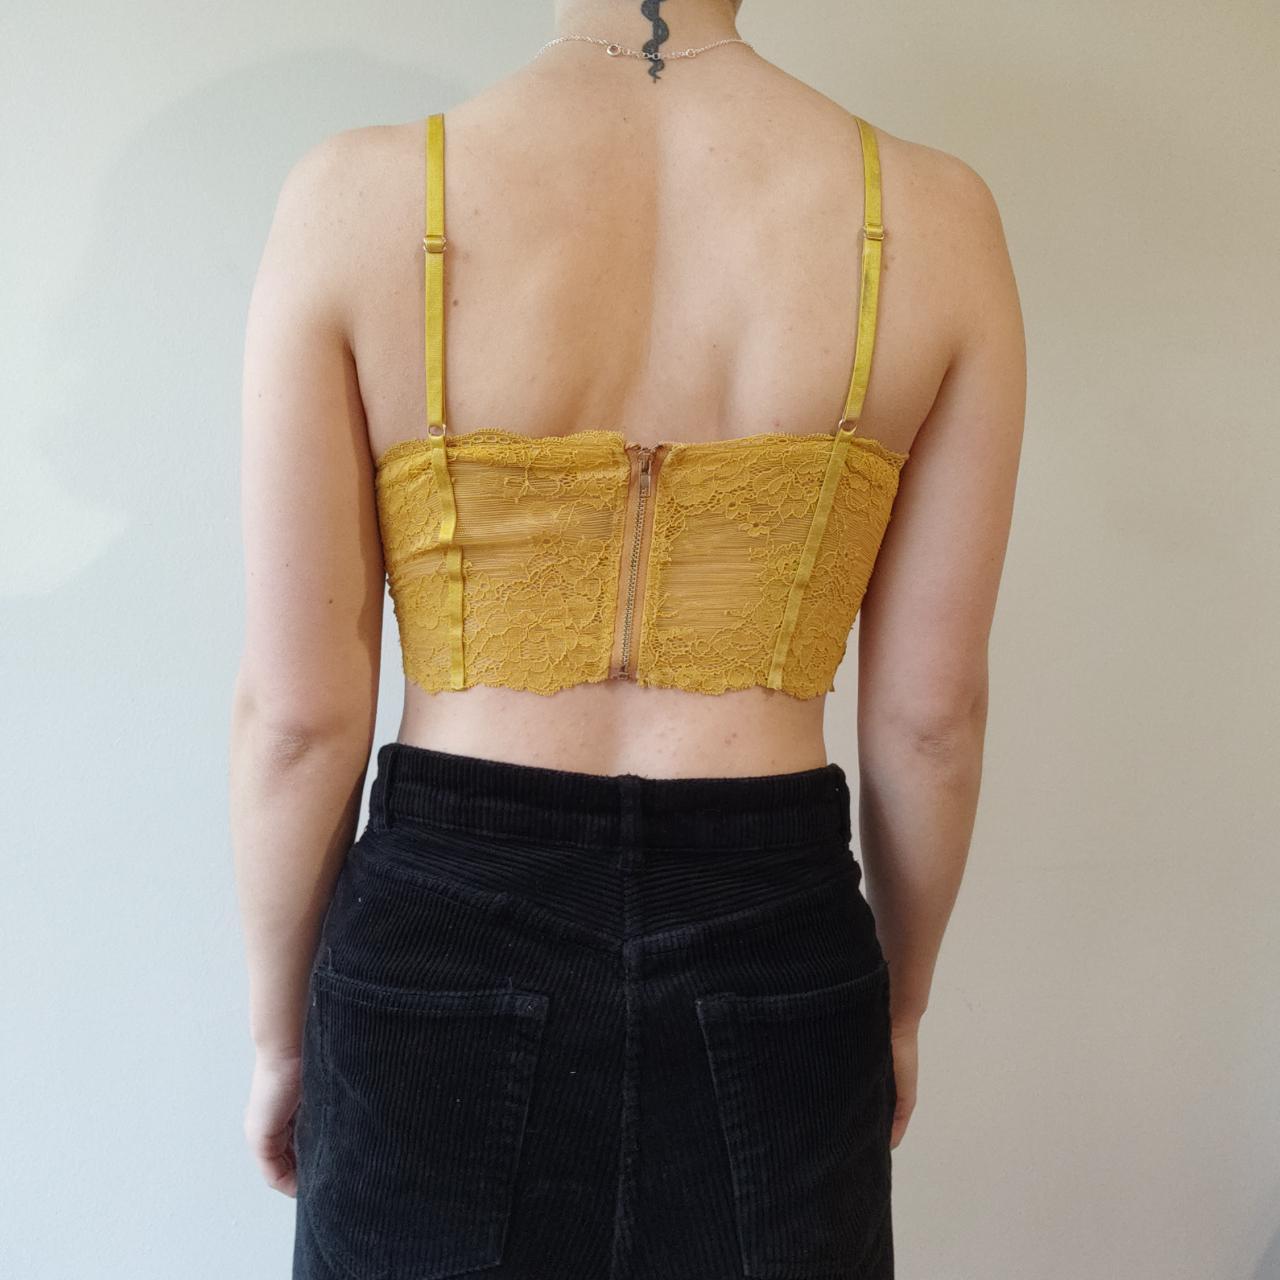 Mustard yellow lace bralette / crop top from new - Depop